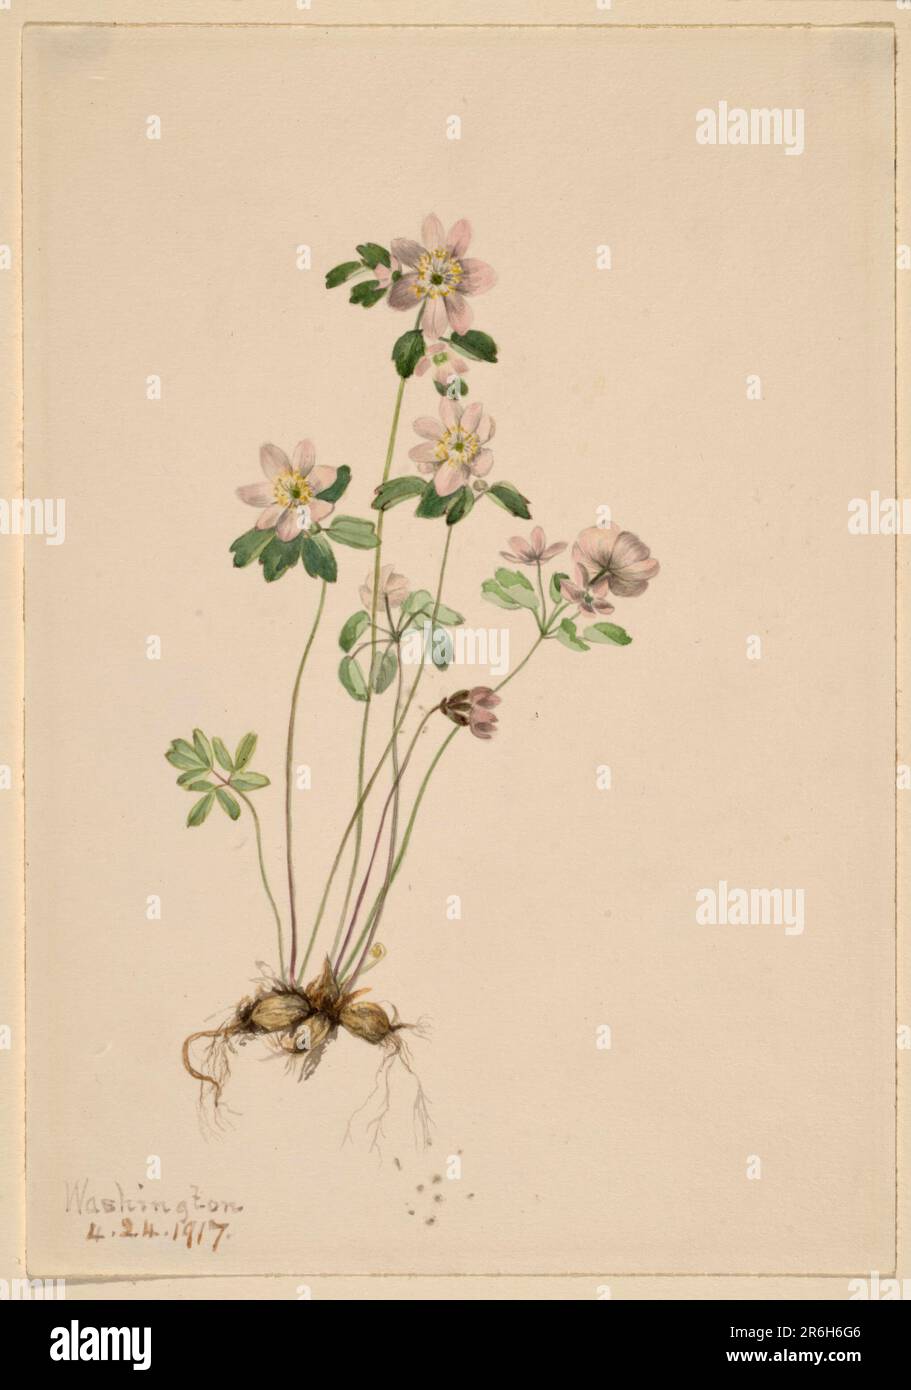 Anemonella (Syndesmon thalictroides). Date: 1917. Watercolor on paper. Museum: Smithsonian American Art Museum. Stock Photo